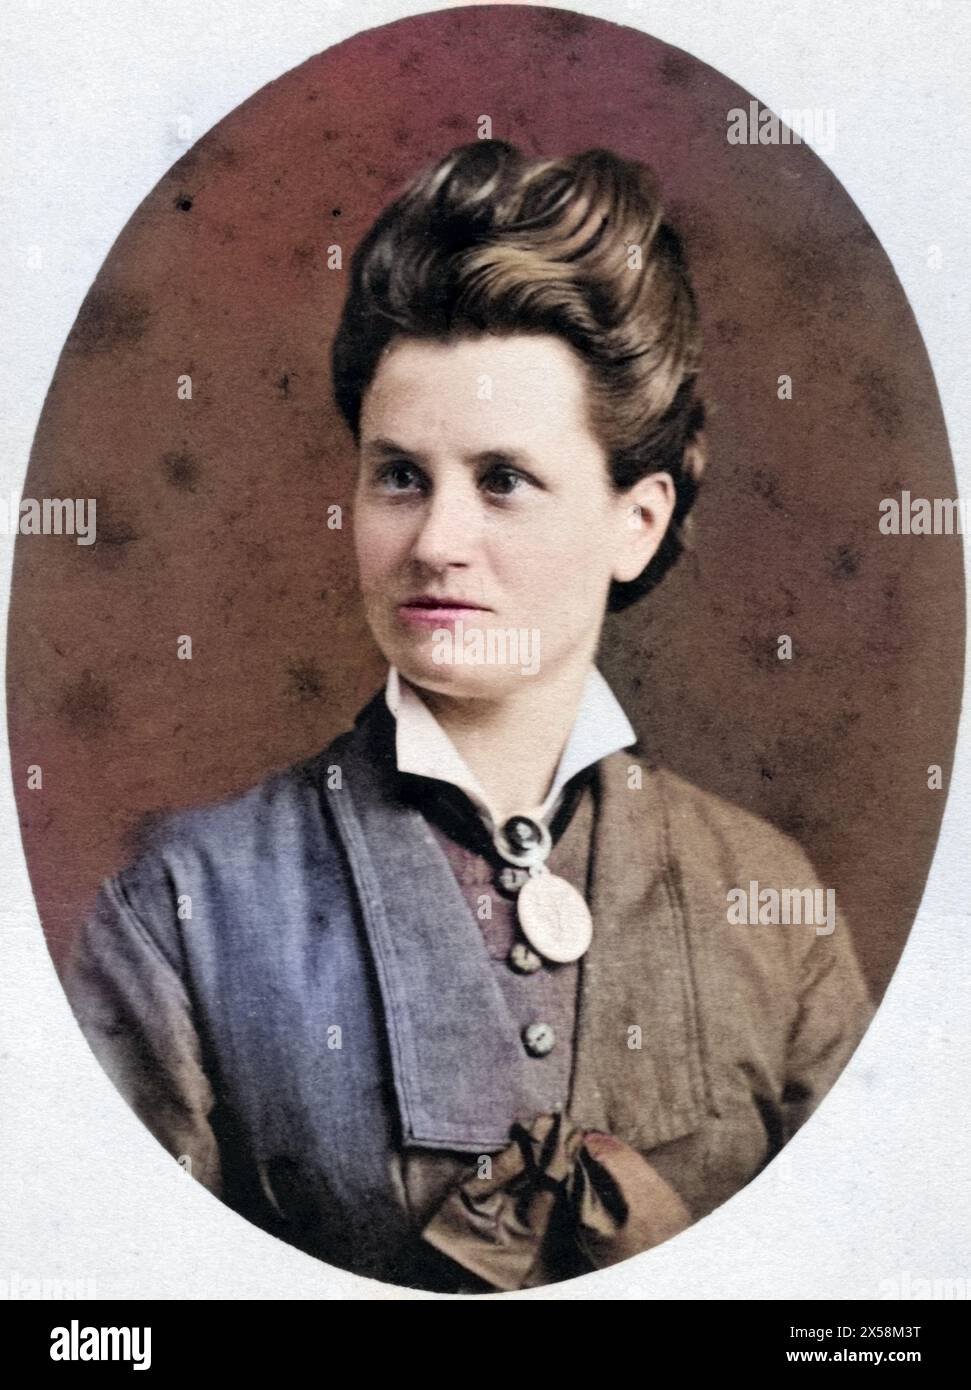 people, women, woman, portrait, photograph by Hertel, Mainz, Germany, carte-de-visite, circa 1900, ADDITIONAL-RIGHTS-CLEARANCE-INFO-NOT-AVAILABLE Stock Photo